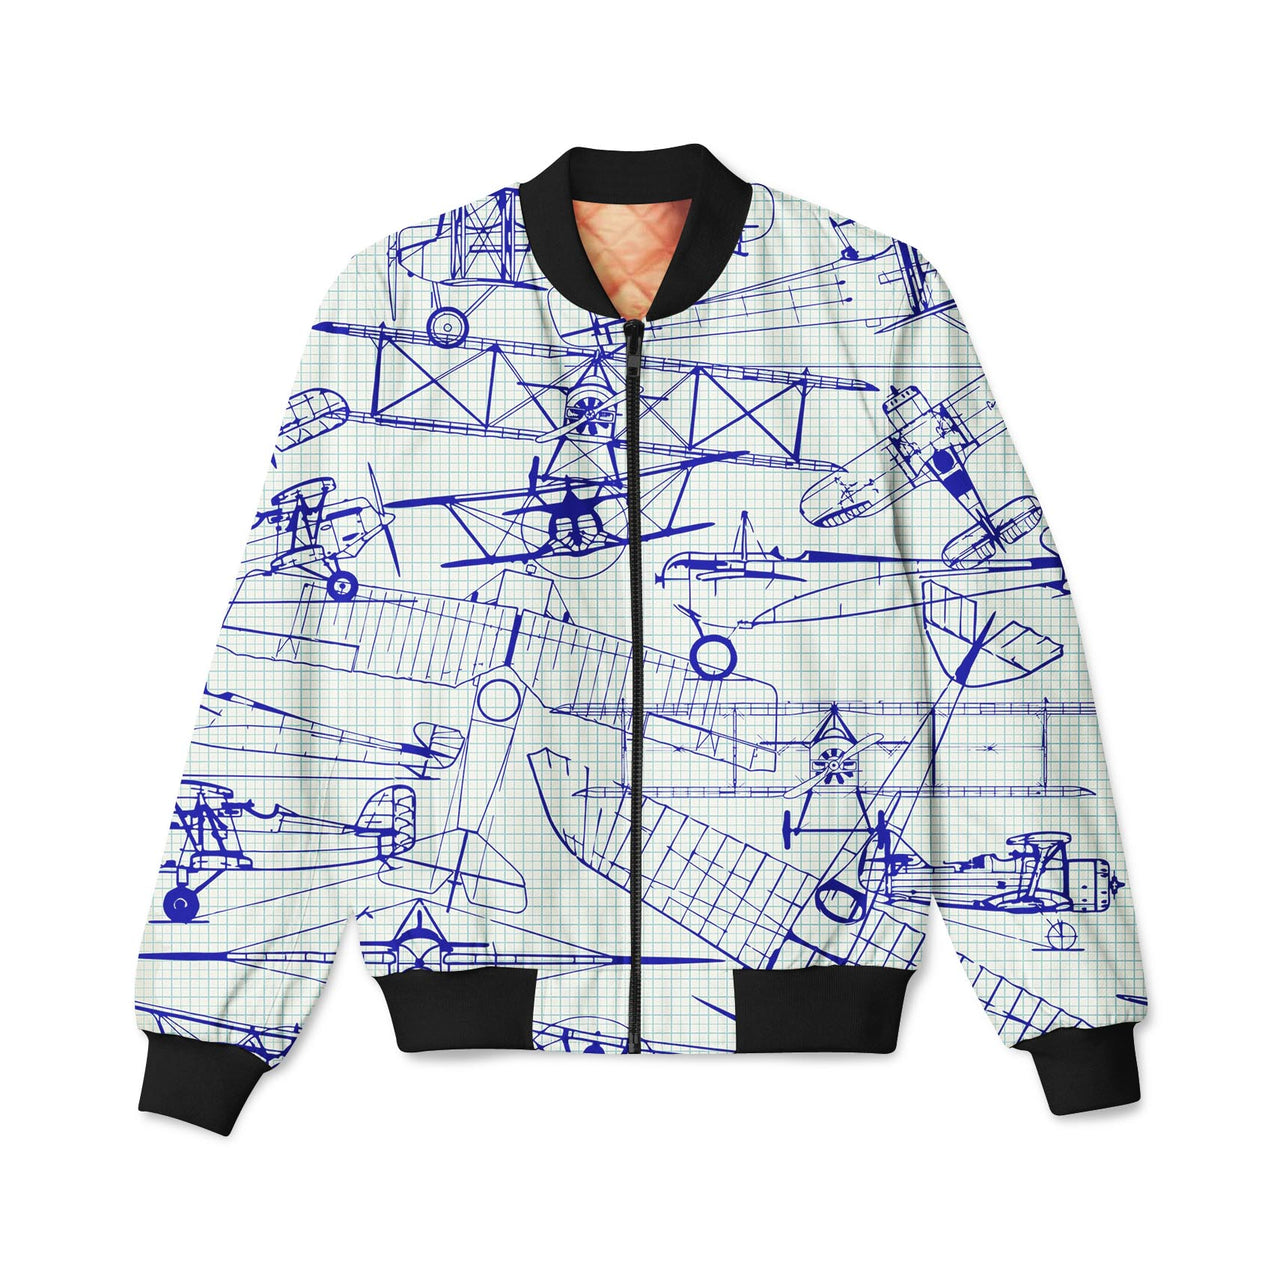 Amazing Drawings of Old Aircrafts Designed 3D Pilot Bomber Jackets